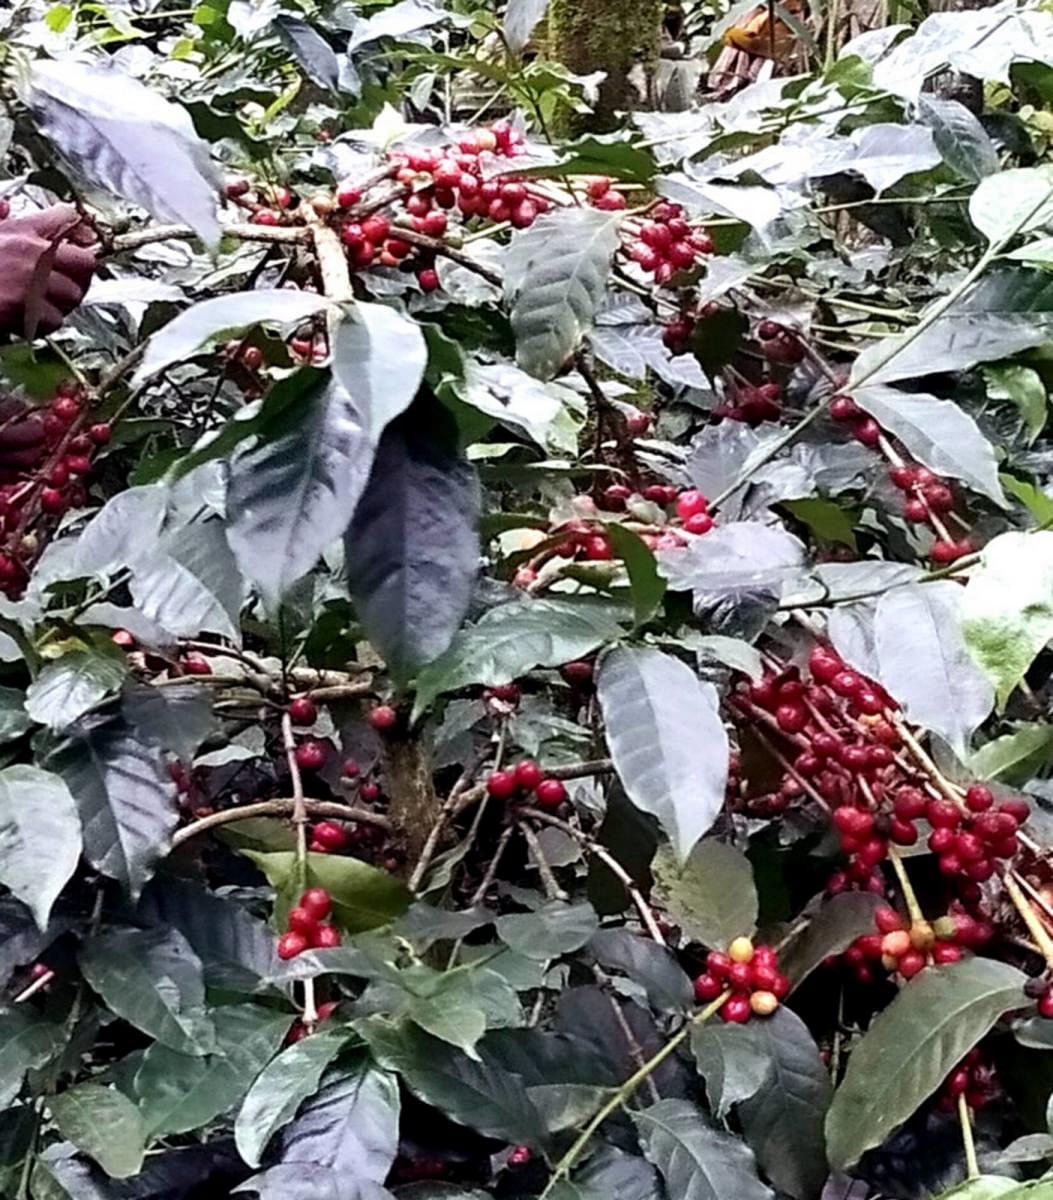 The Arabica coffee ready for harvest in Somwarpet.